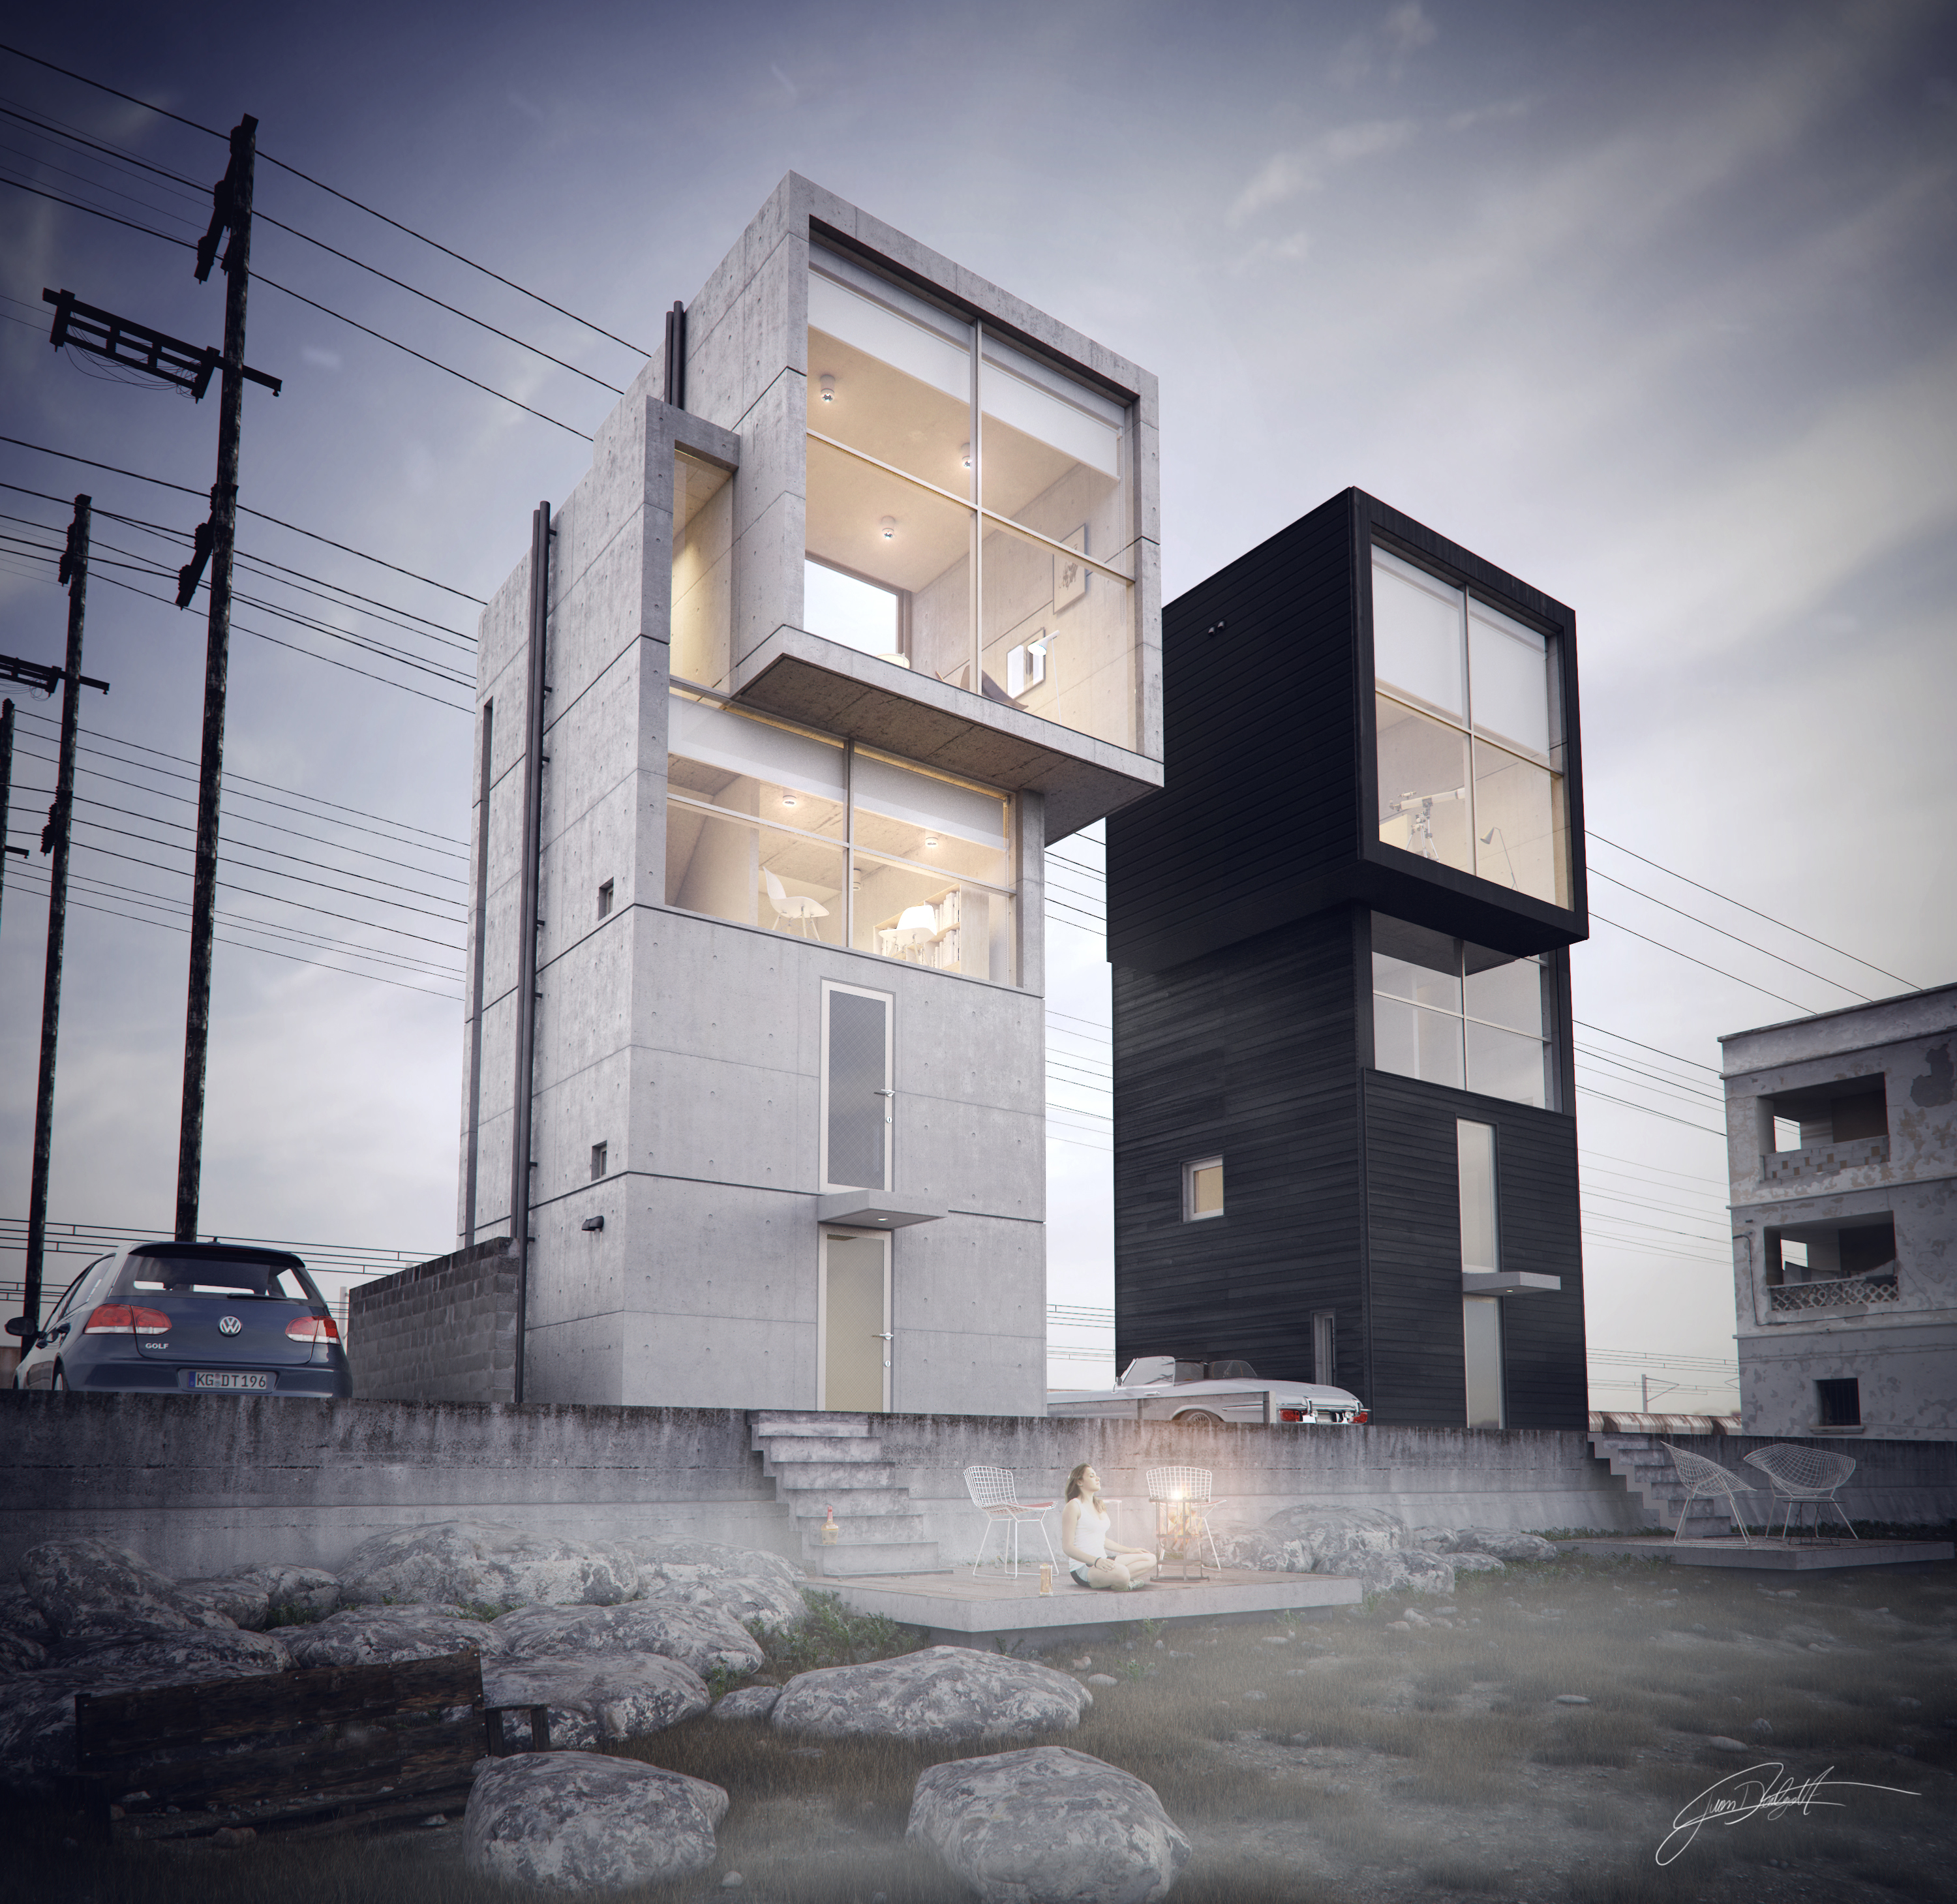 d ds max rhino photoshop after effects Ando House Juan Delgado